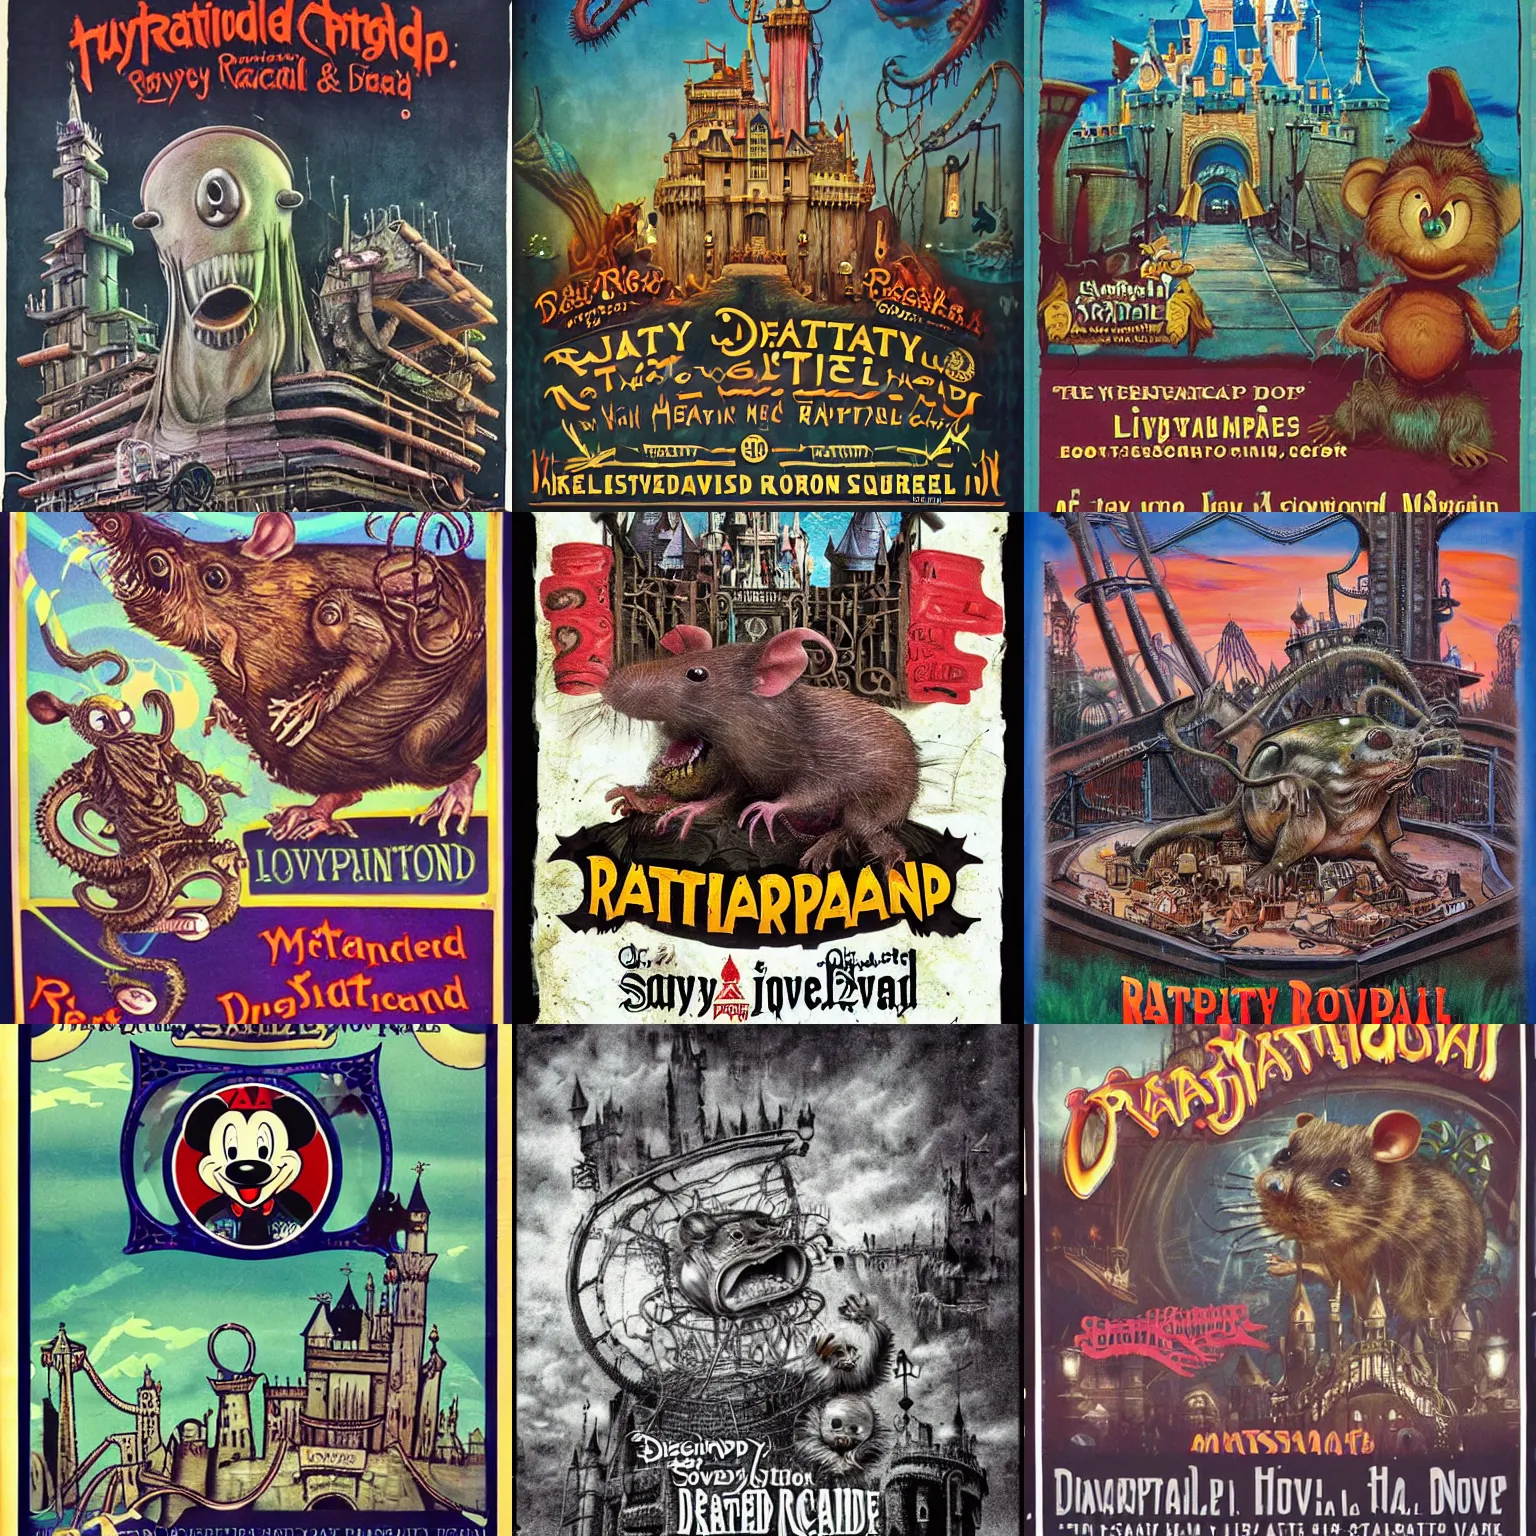 Prompt: dystopian Lovecraftian! ratty Disneyland advertisement showing a smiling! rat family enjoying deadly! and sadistic theme park rides in the style of H.R. Giger